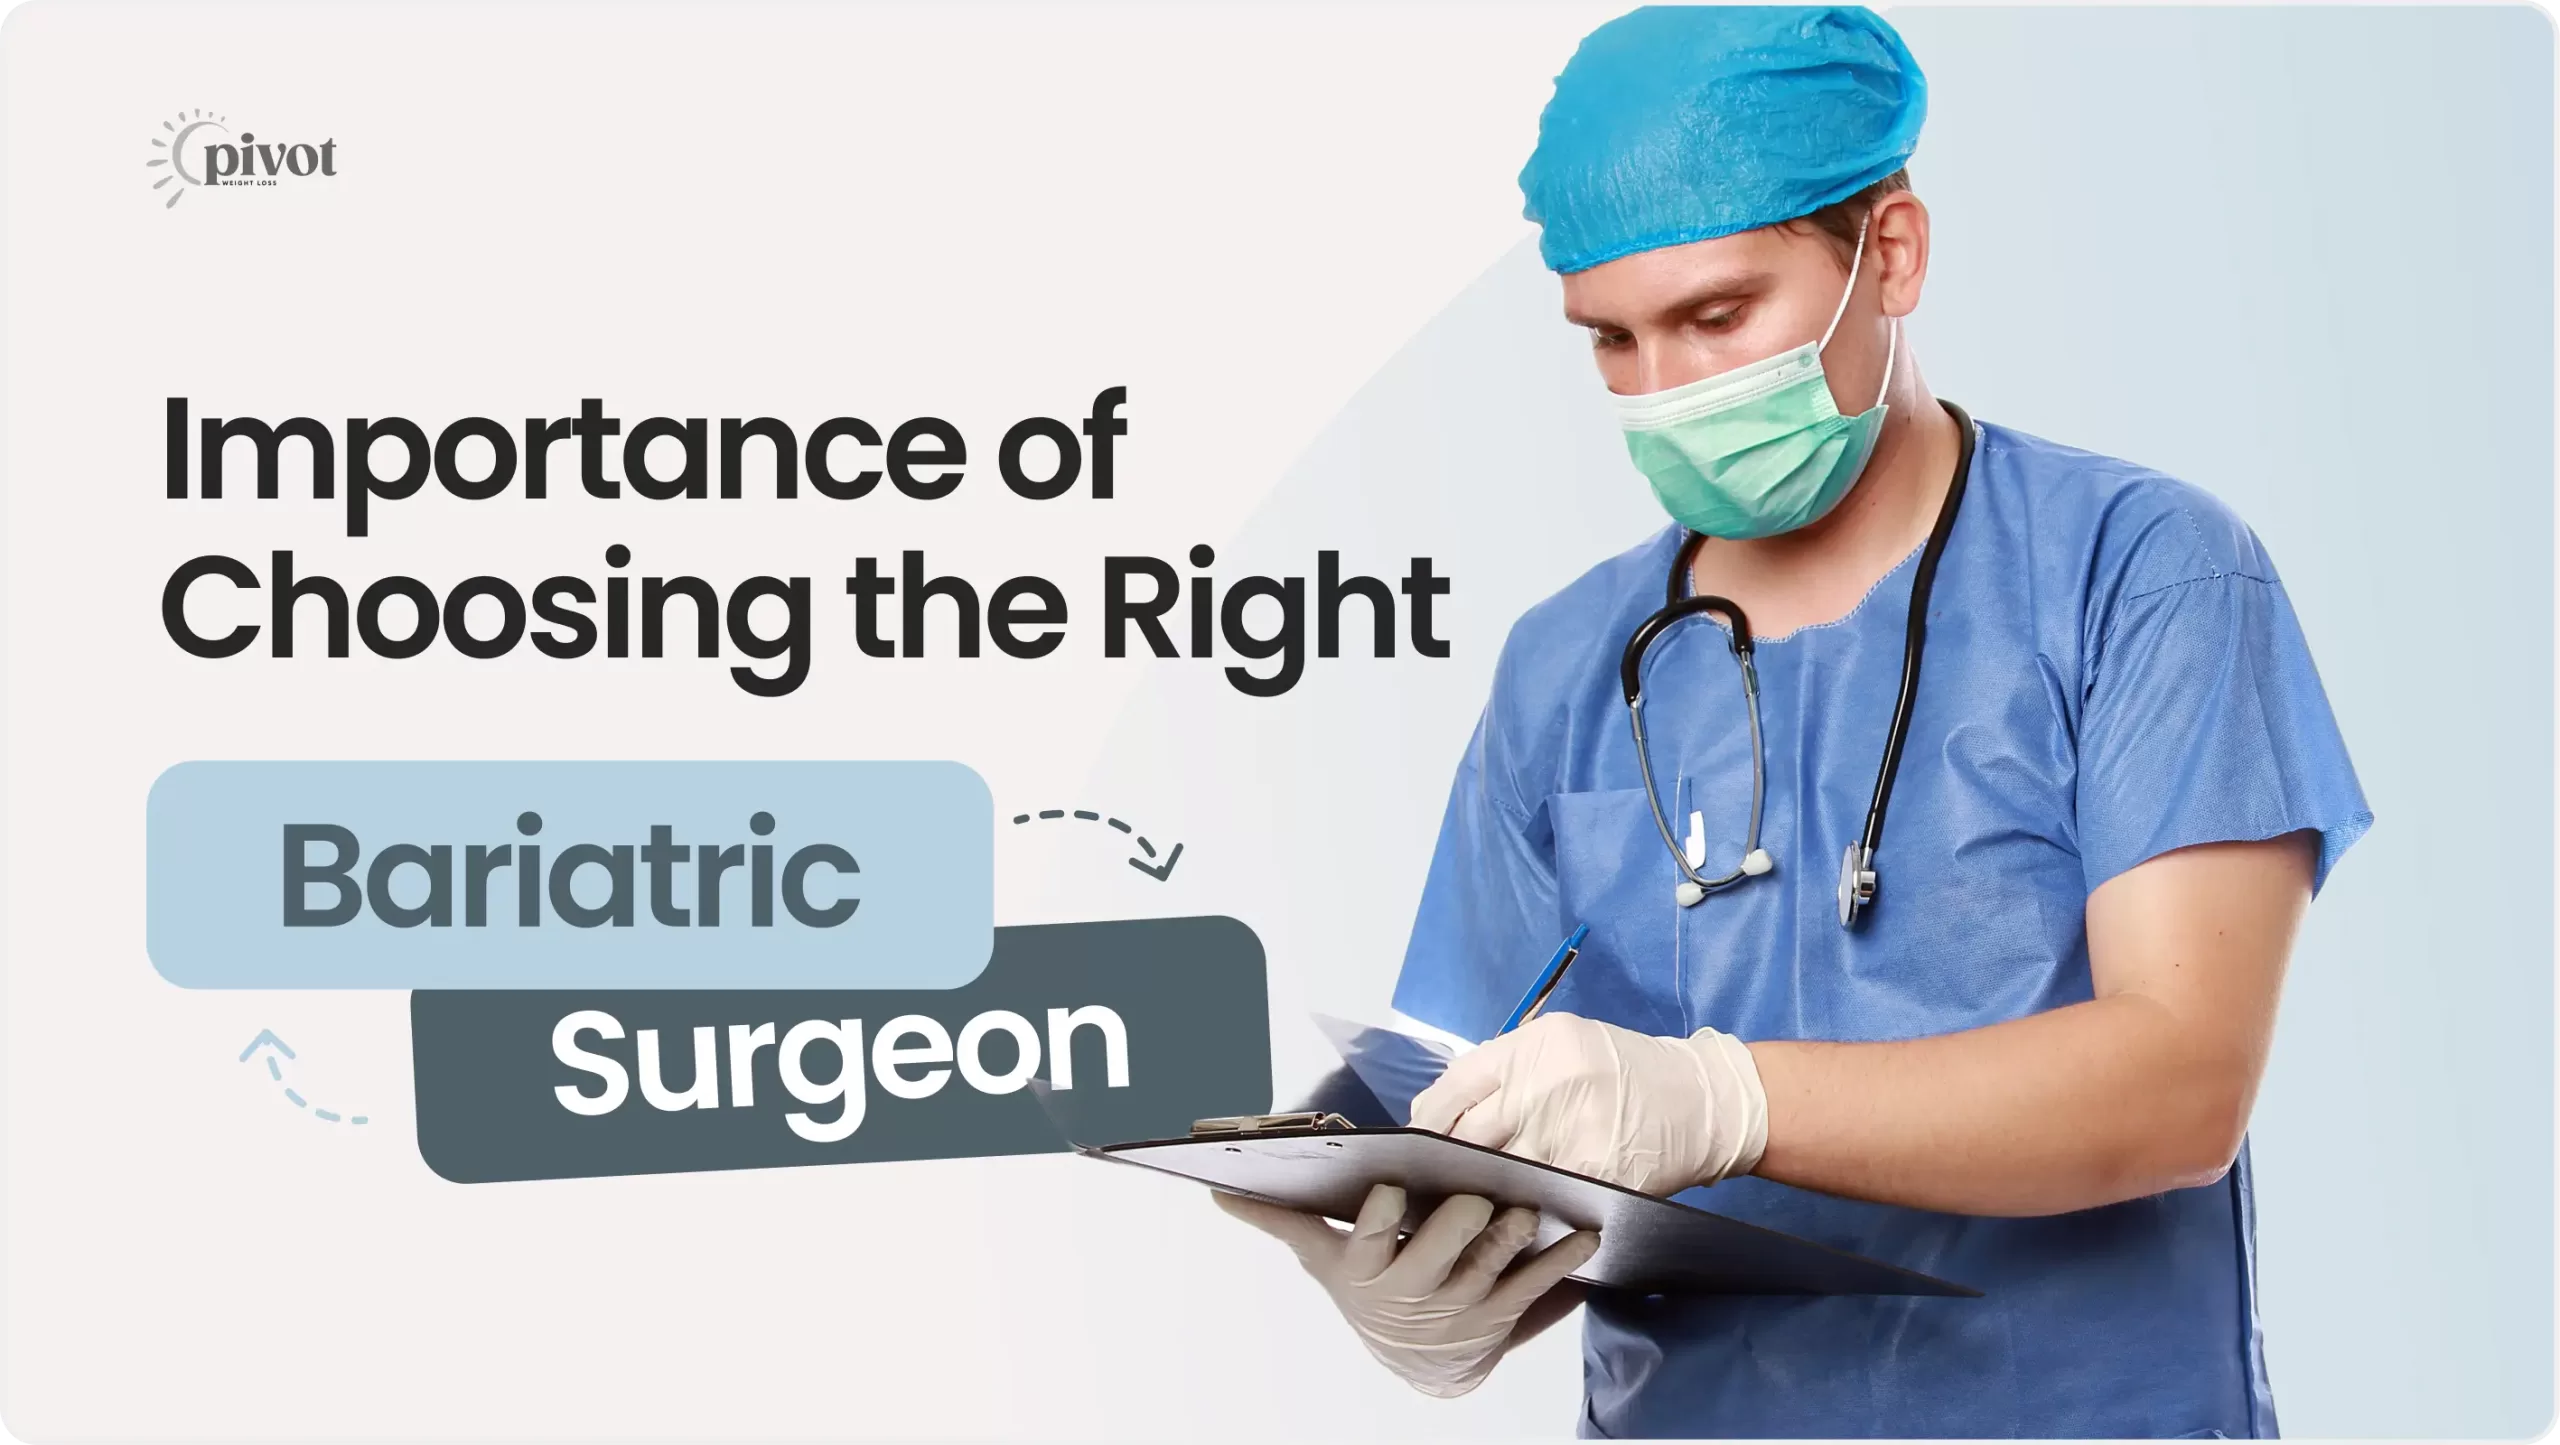 Importance of Choosing the Right Bariatric Surgeon